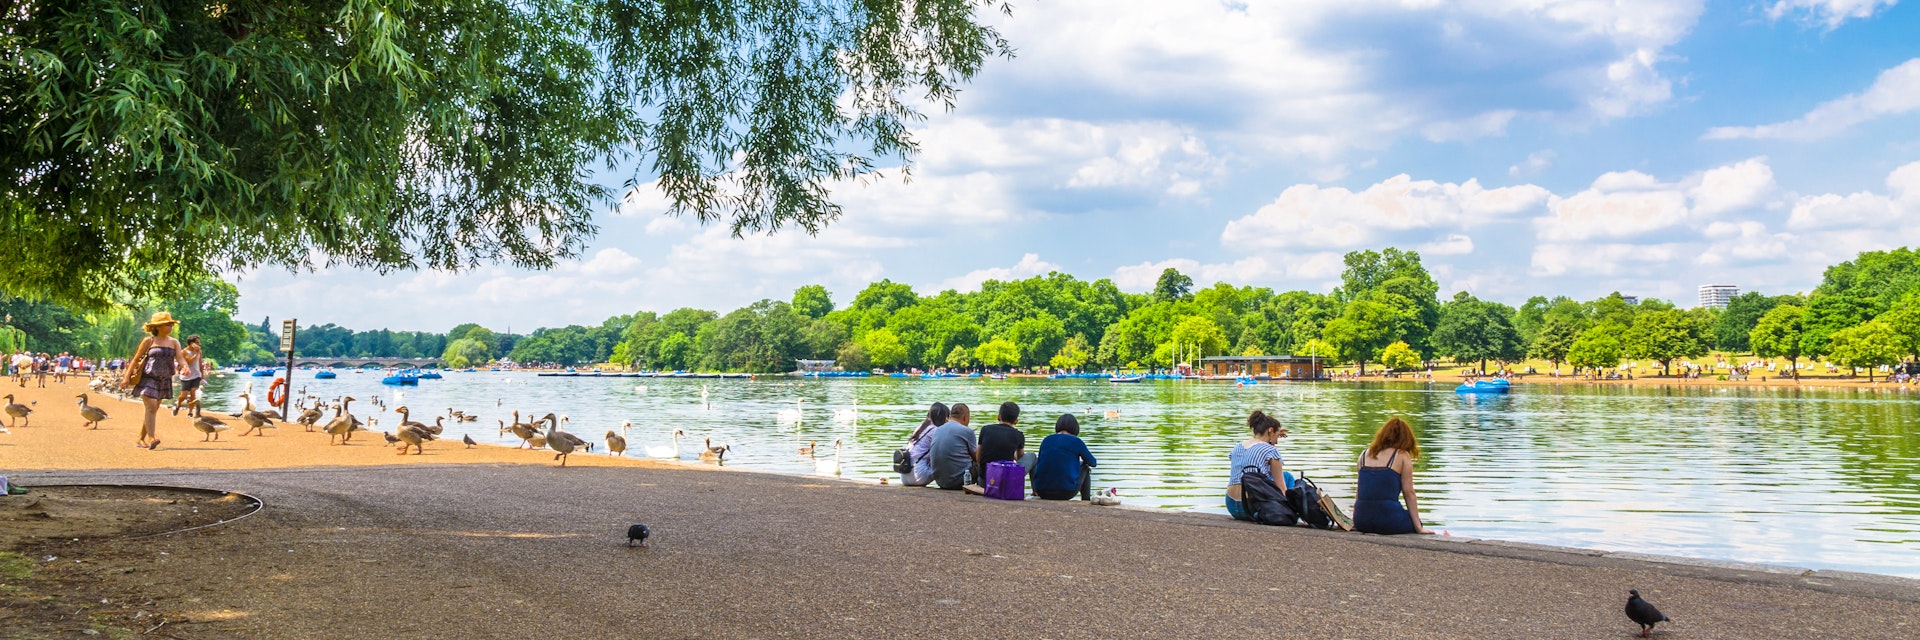 JUNE 18, 2017: Visitors seated on the shore of Serpentine Lake in Hyde Park.